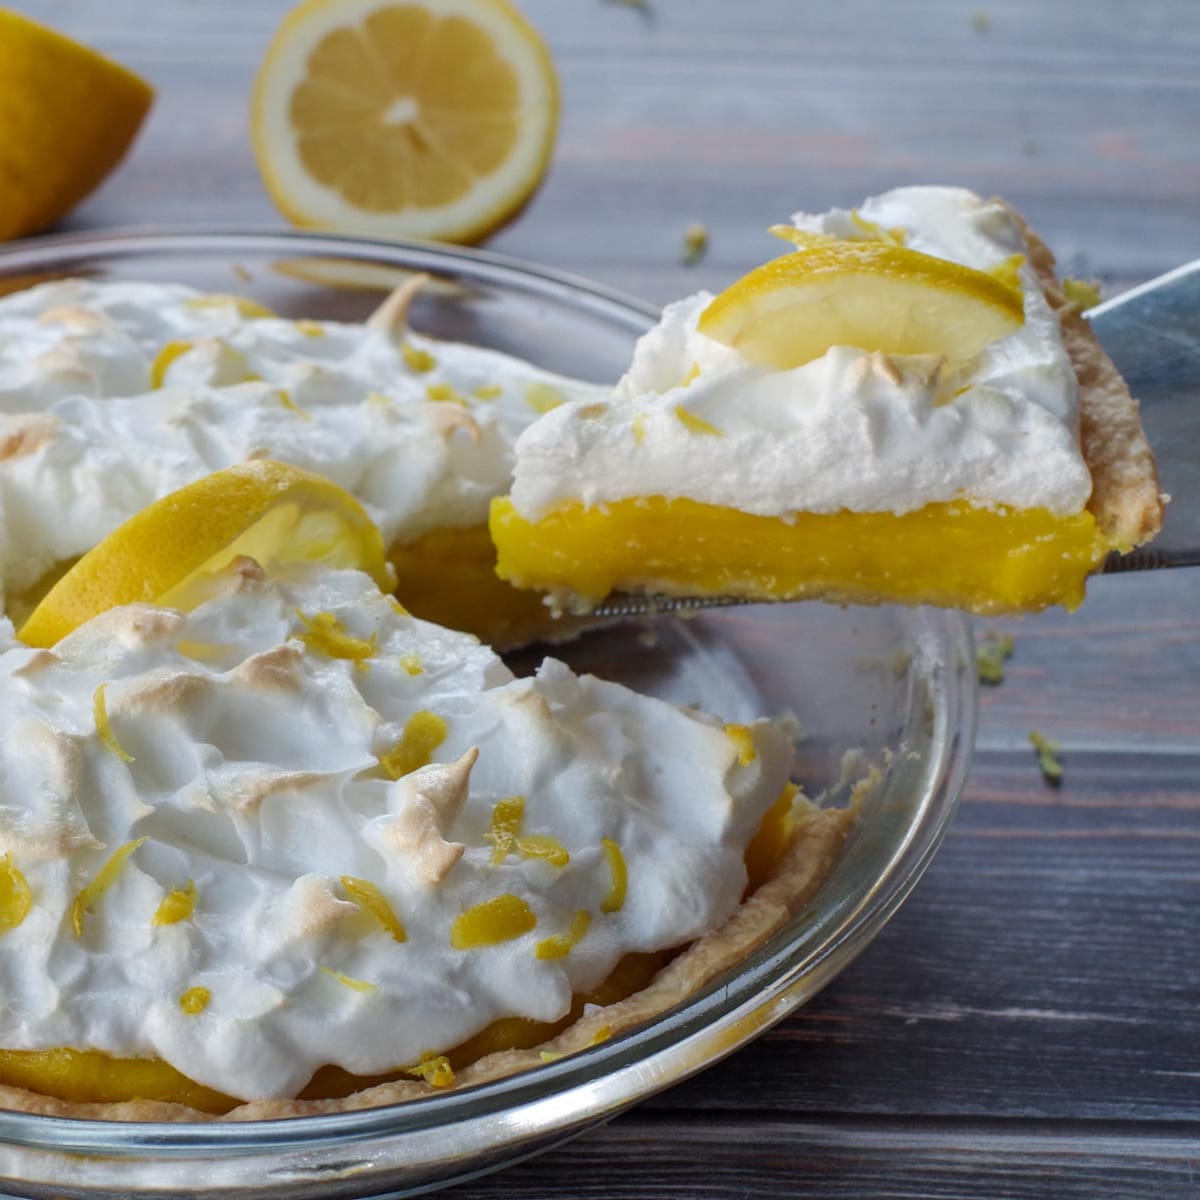 a piece of lemon pie being lifted out of a whole pie, with a lemon cut in half in background